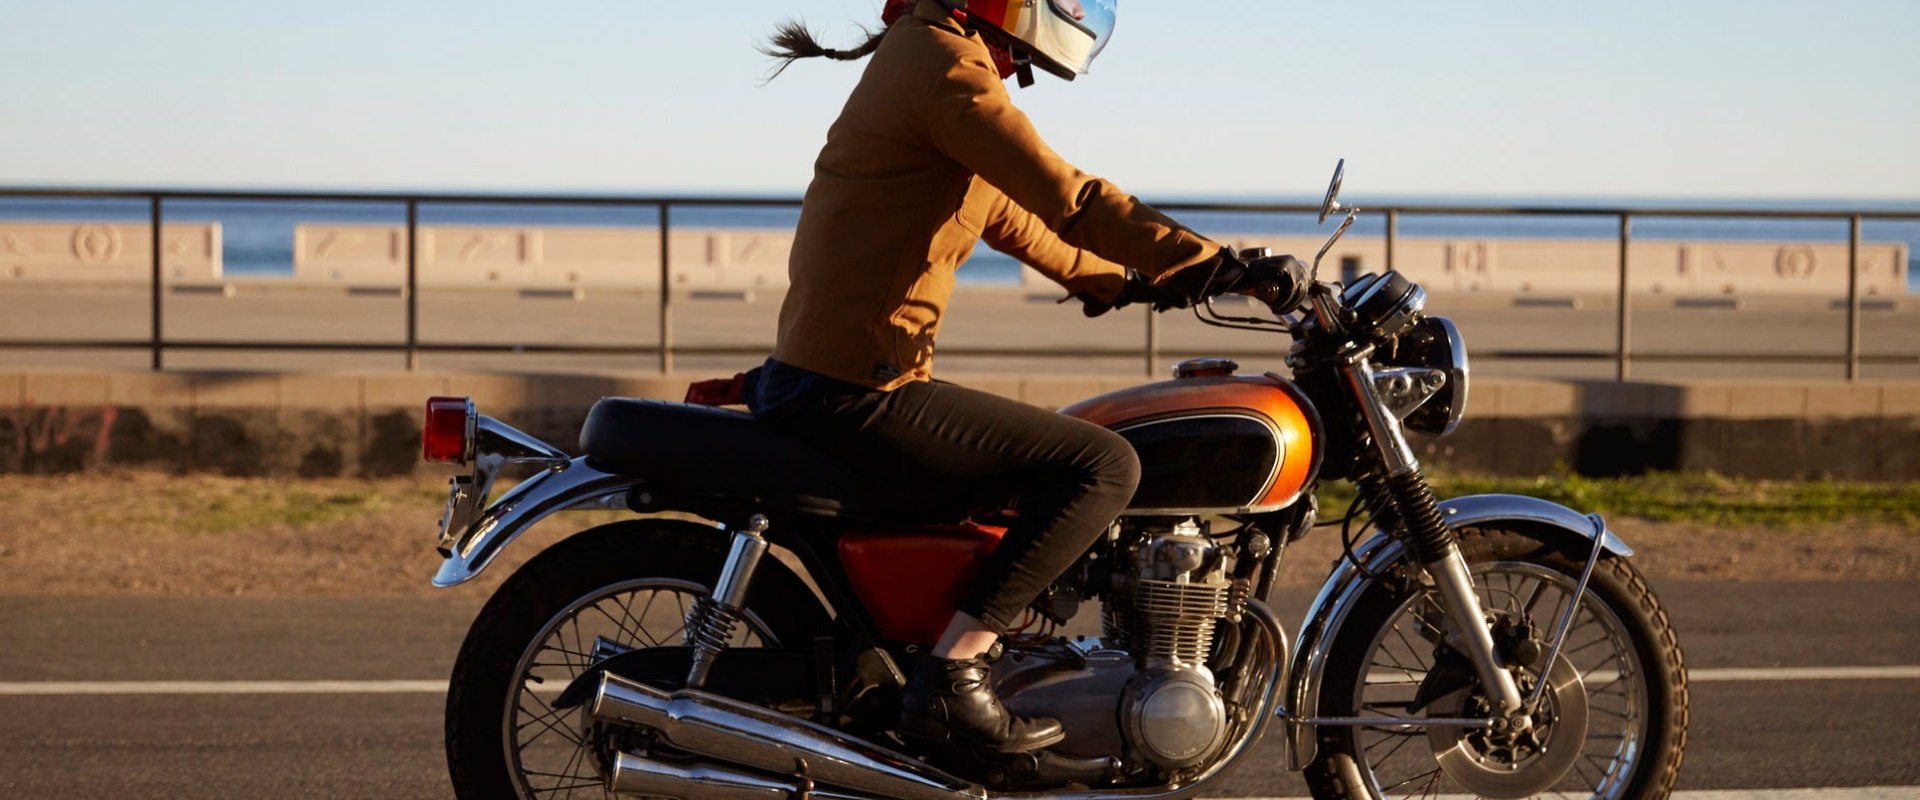 How Much Does Motorcycle Insurance Cost In Florida?